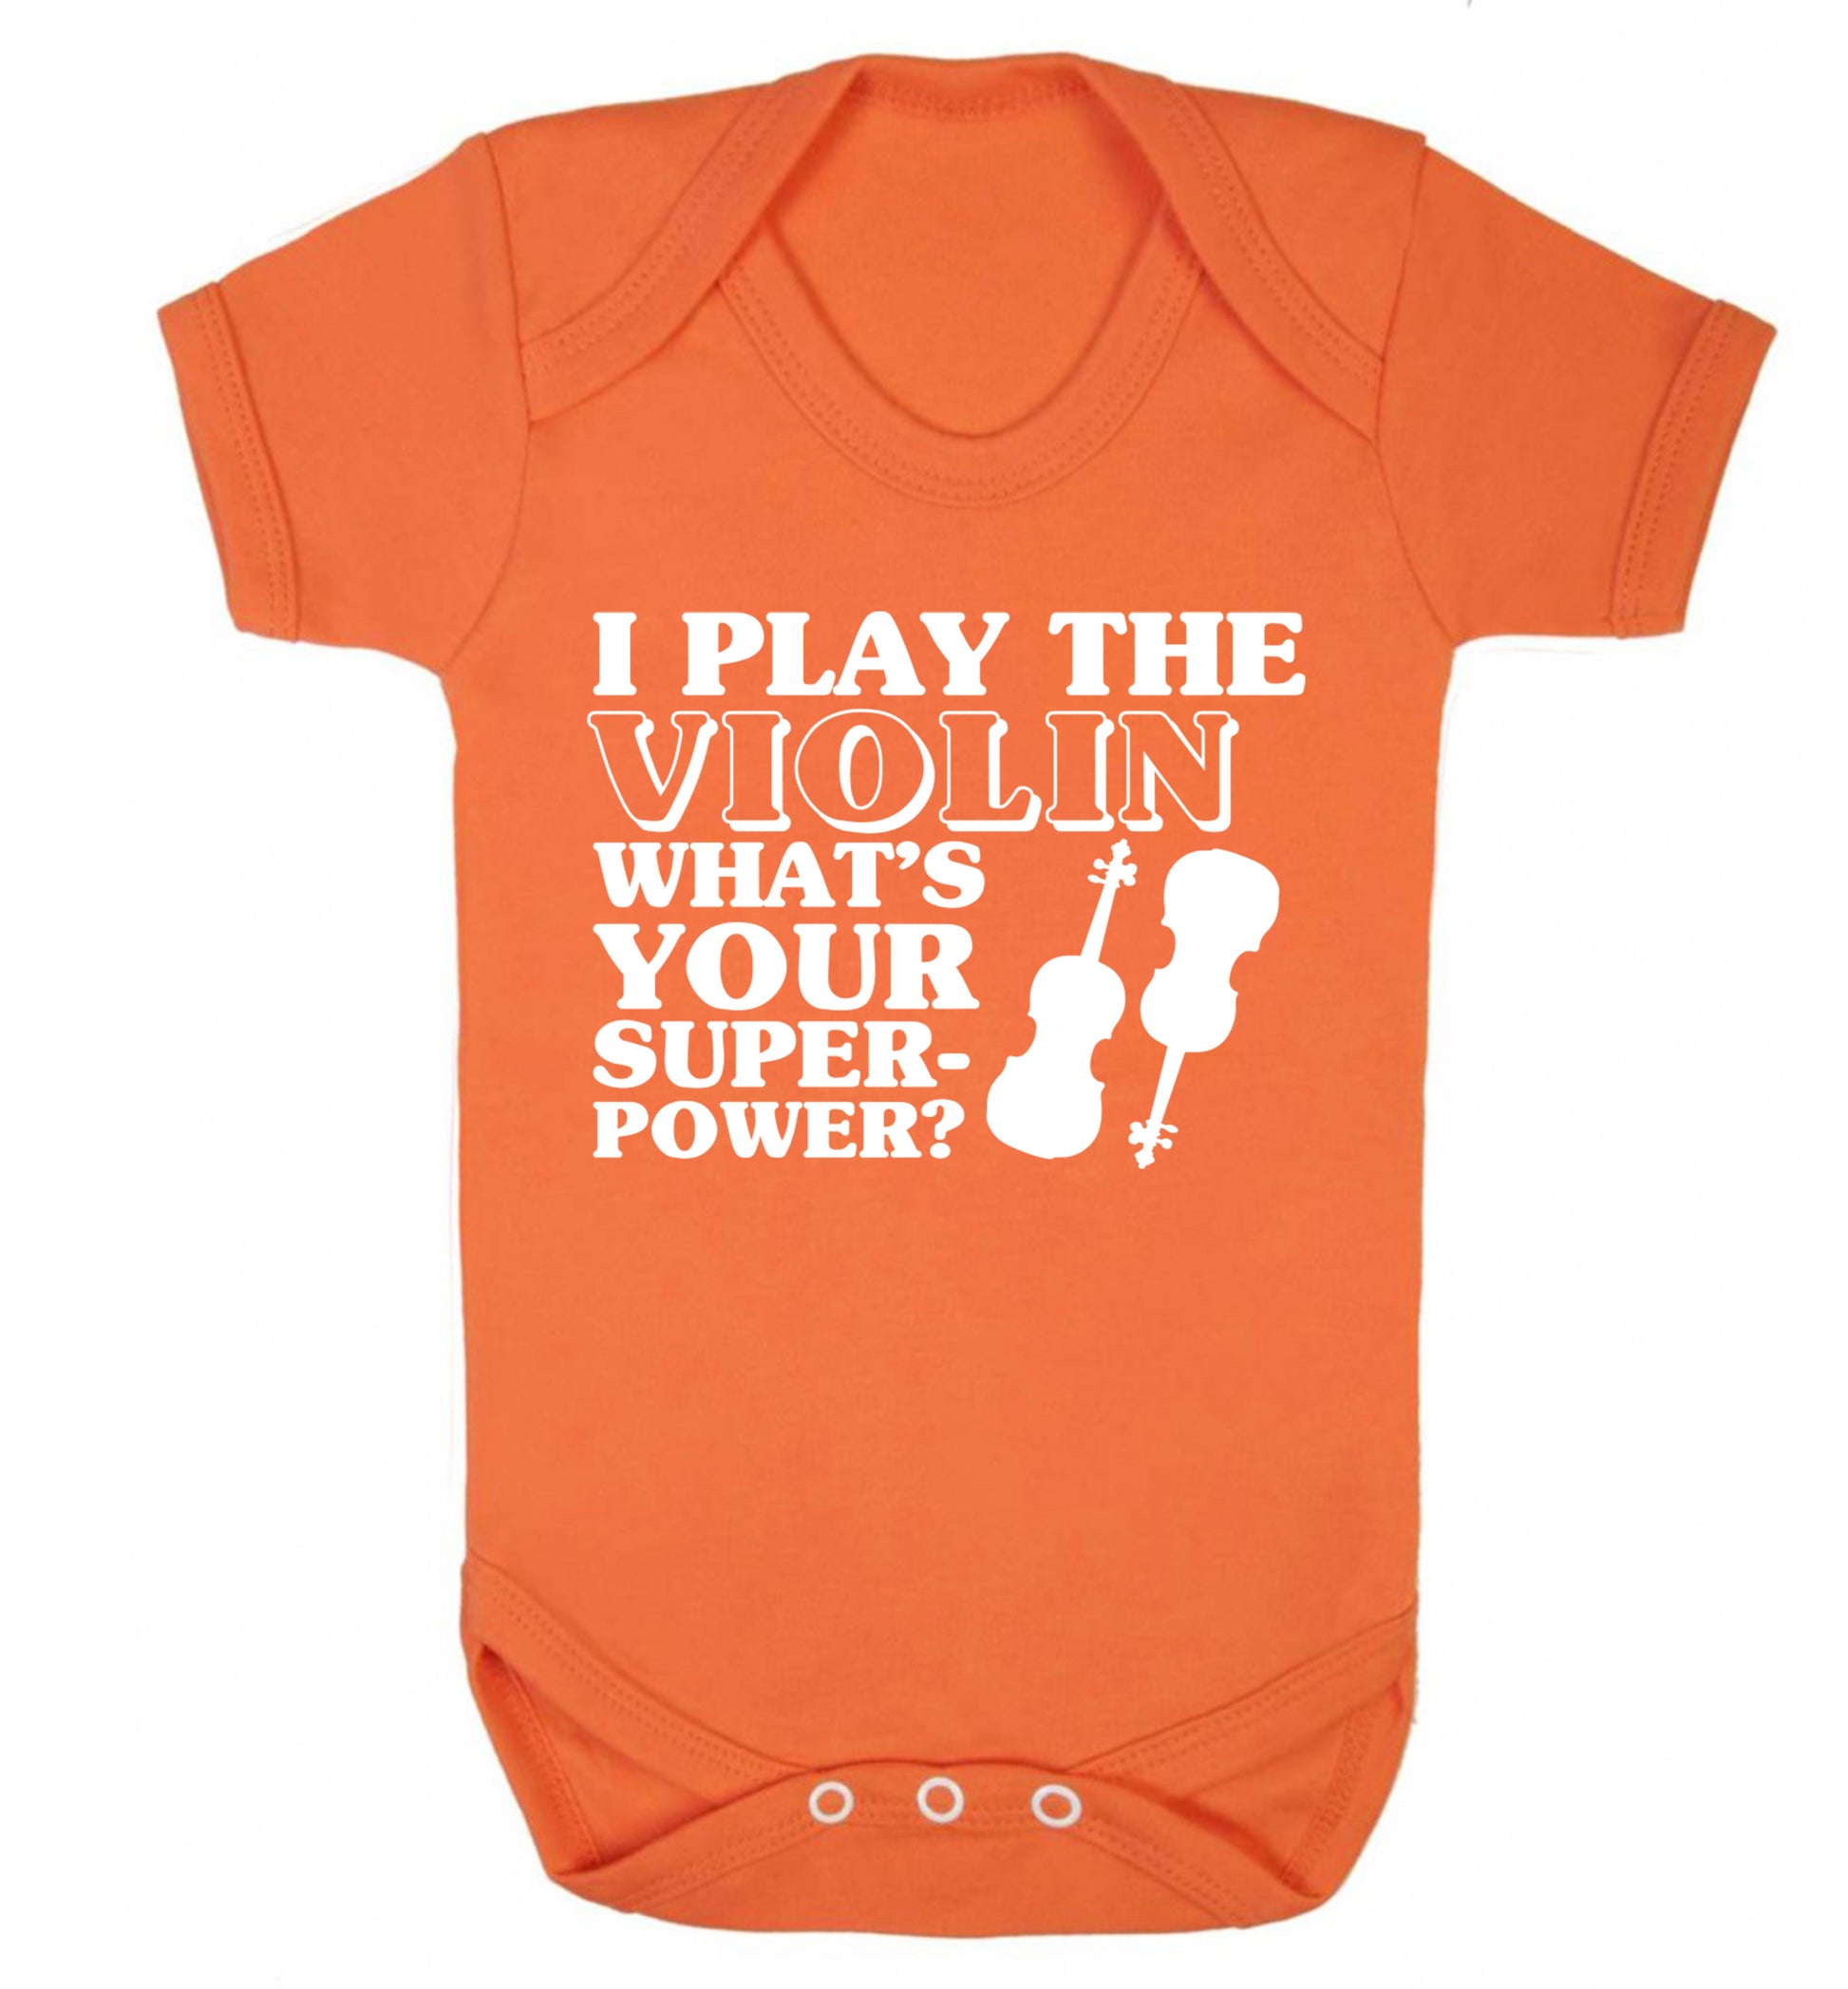 I Play Violin What's Your Superpower? Baby Vest orange 18-24 months